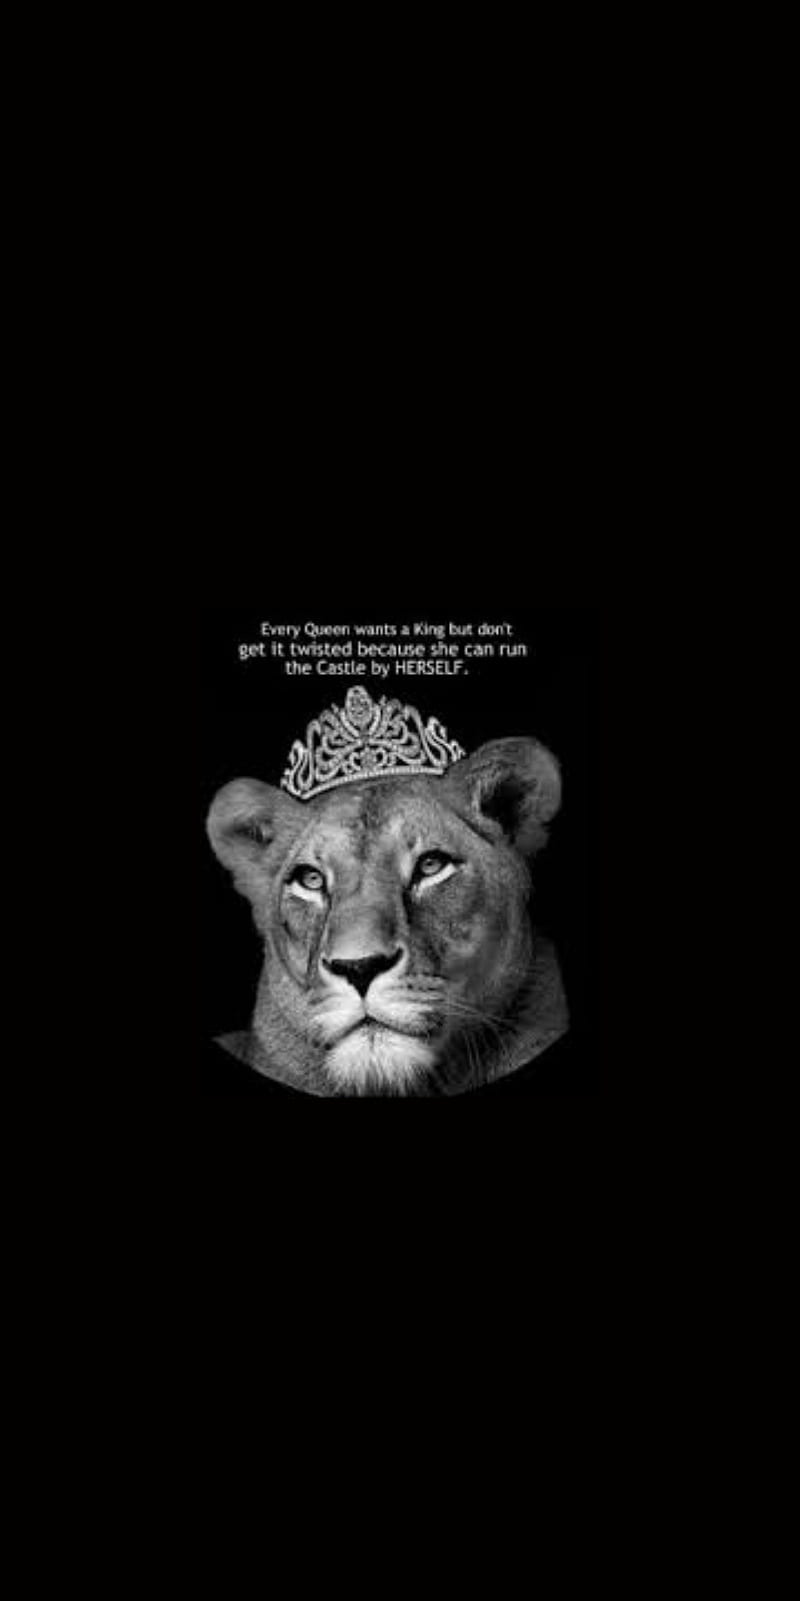 Crowned Queen Lioness, Animal Portrait, Poster Print, Wall Art Home Décor |  eBay